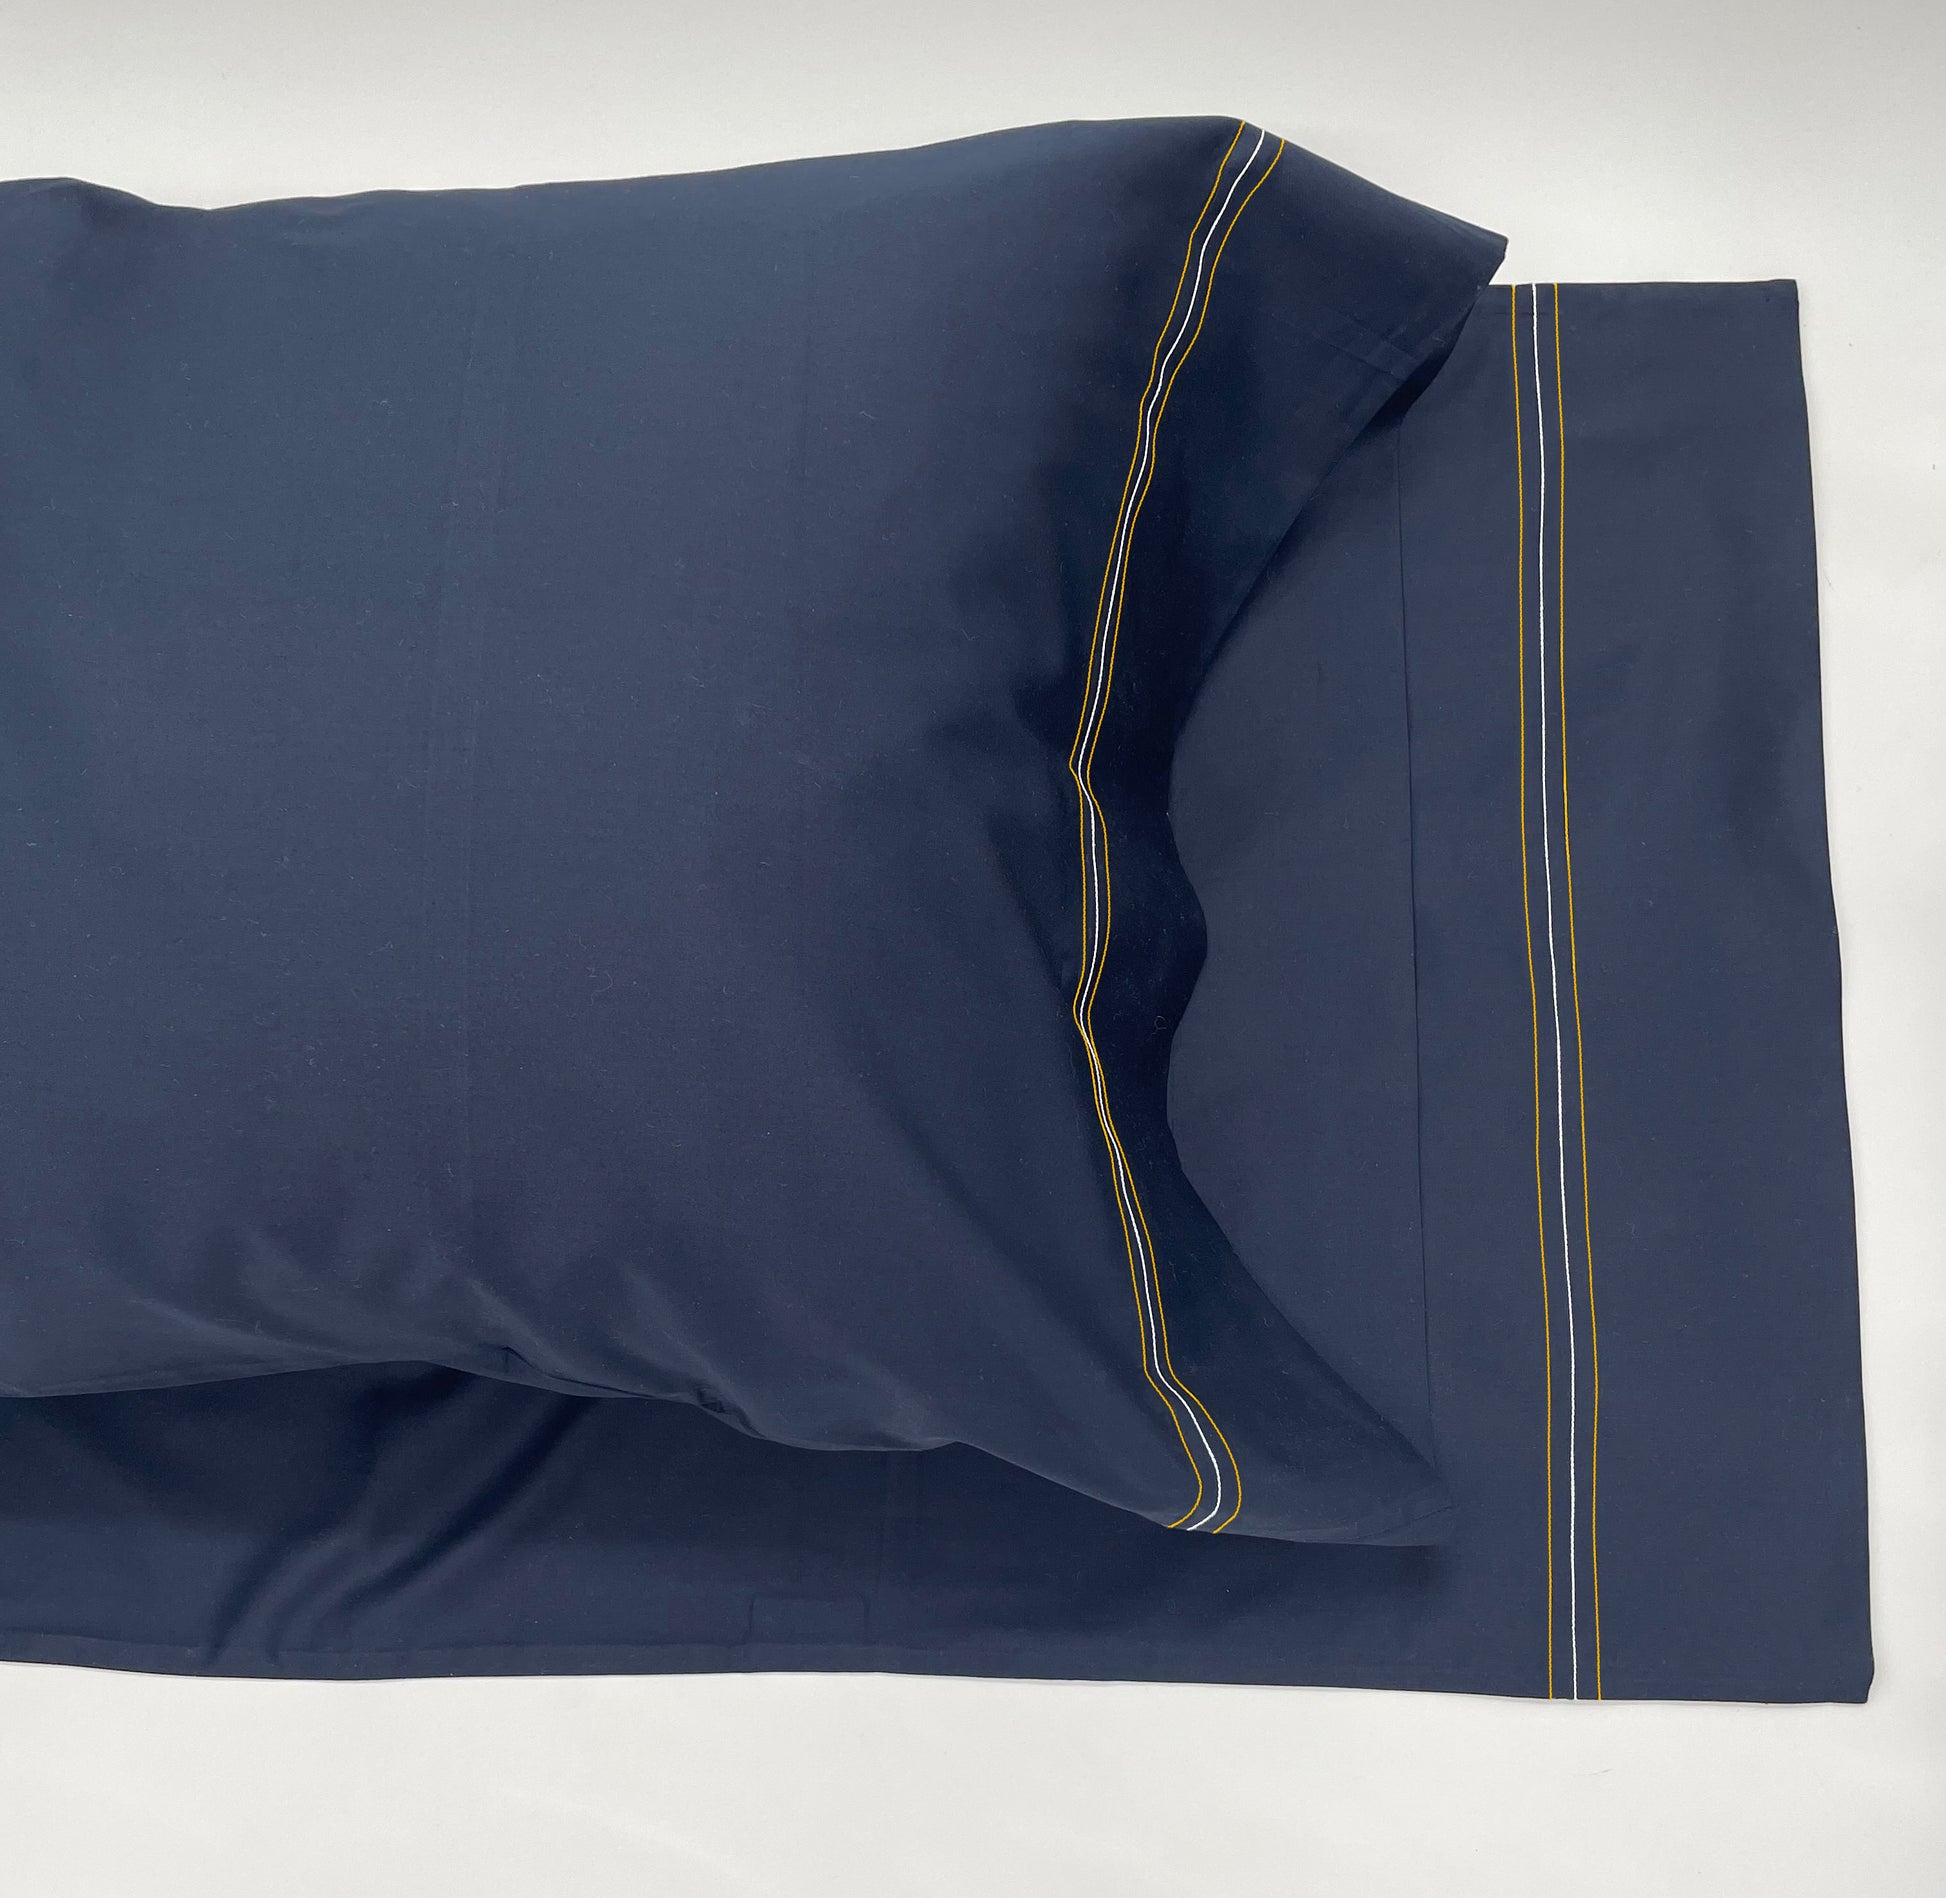 Narragansett Deep Sea Pillow Case with a triple contrasting stitch in Yellow, White and Yellow.